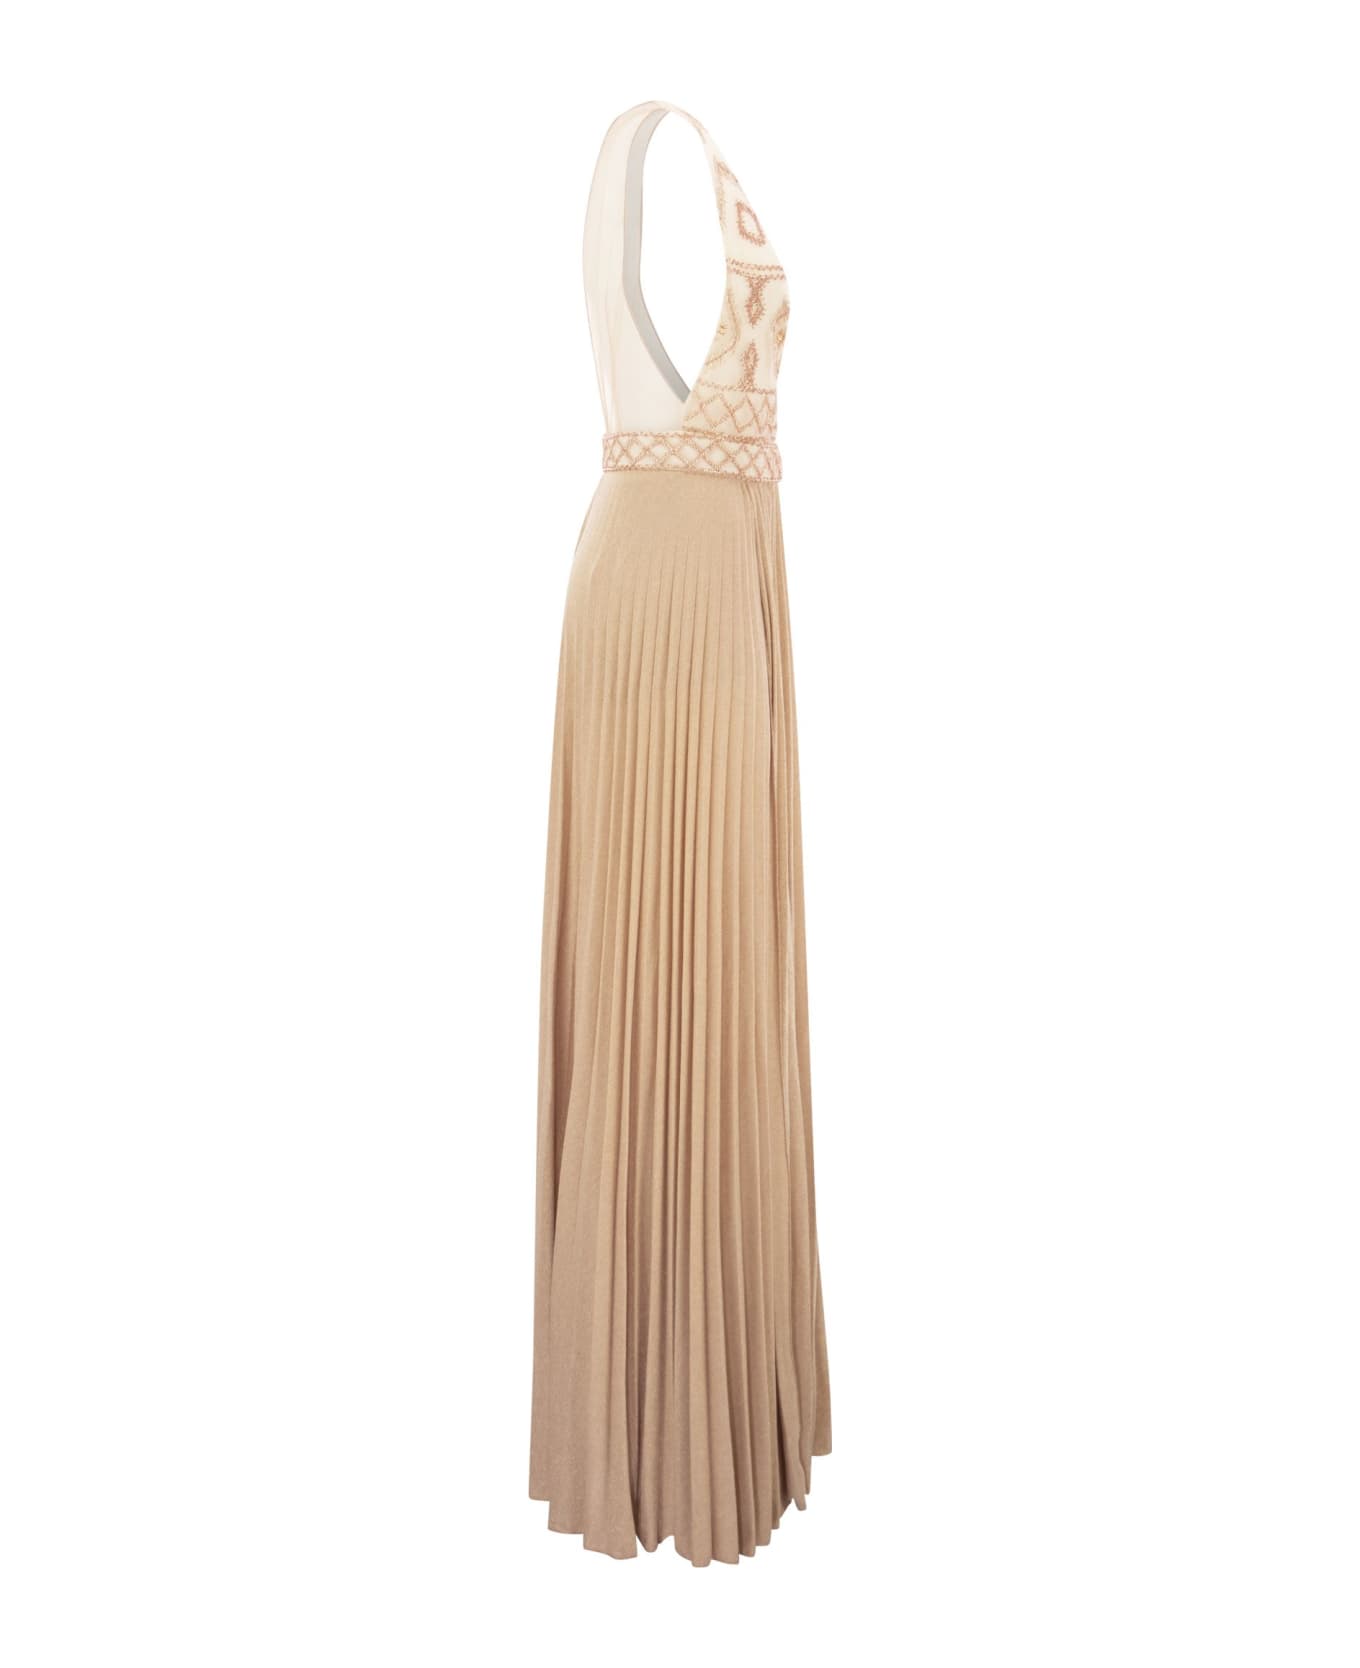 Elisabetta Franchi Red Carpet Dress With Embroidery - Pink